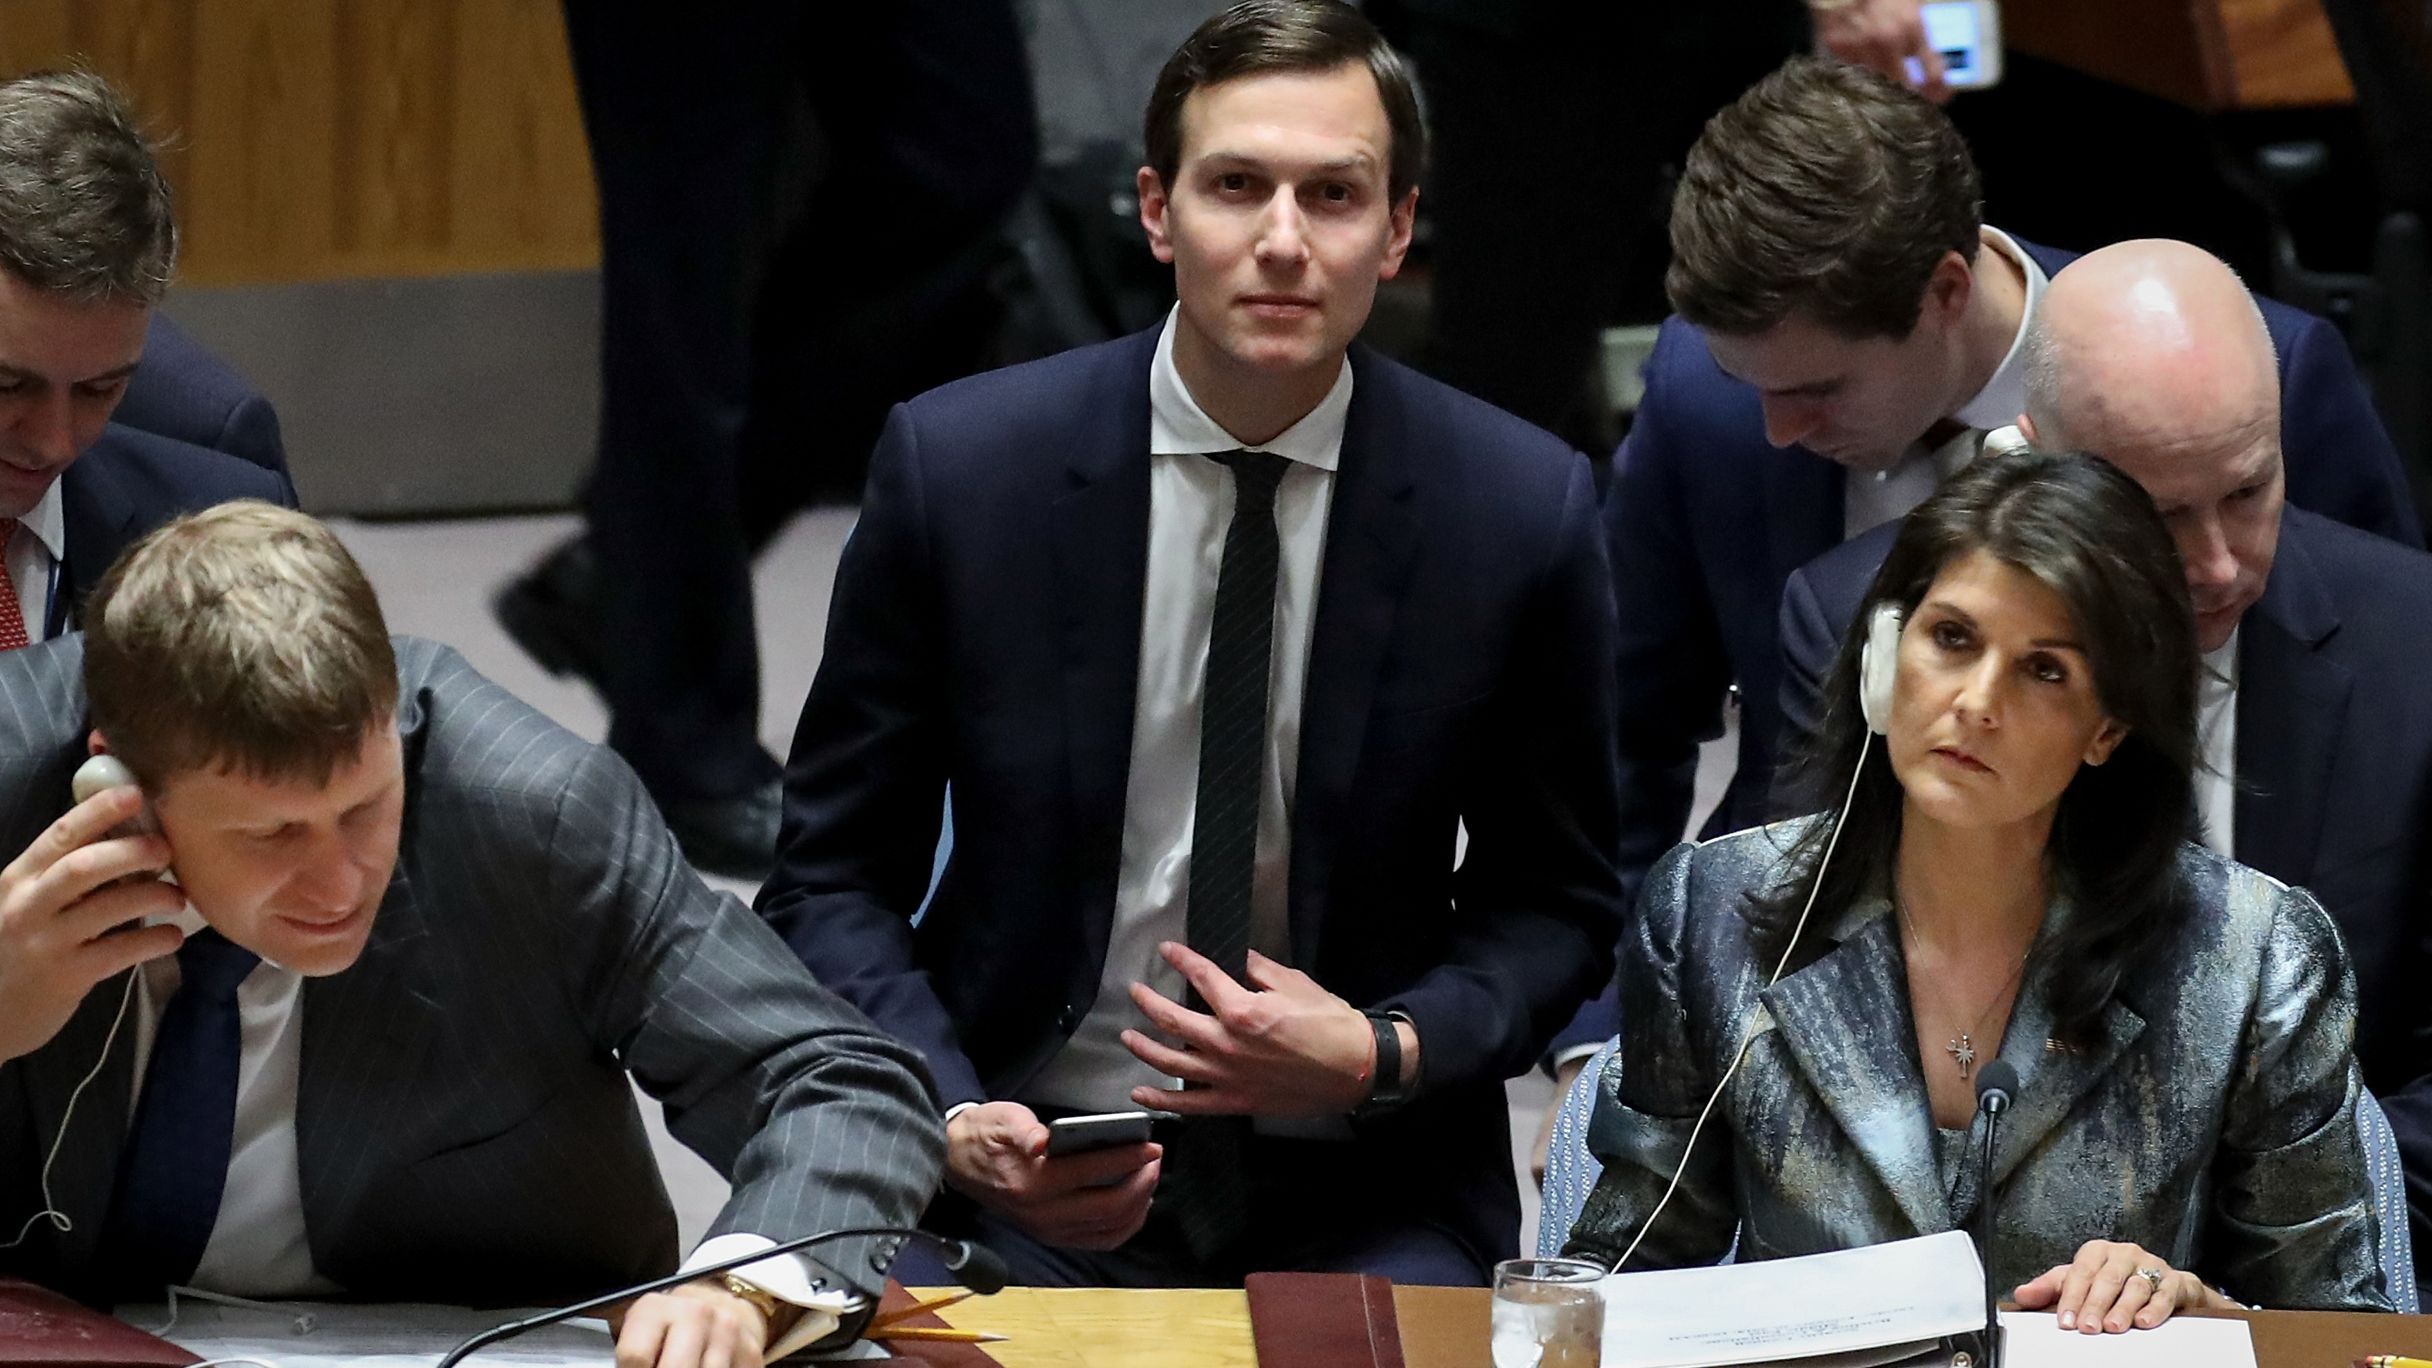 White House Senior Advisor Jared Kushner (2nd from R) takes his seat as US ambassador to the United Nations Nikki Haley (R) looks on before the start of a United Nations Security Council concerning meeting concerning issues in the Middle East, at UN headquarters, February 20, 2018 in New York City.